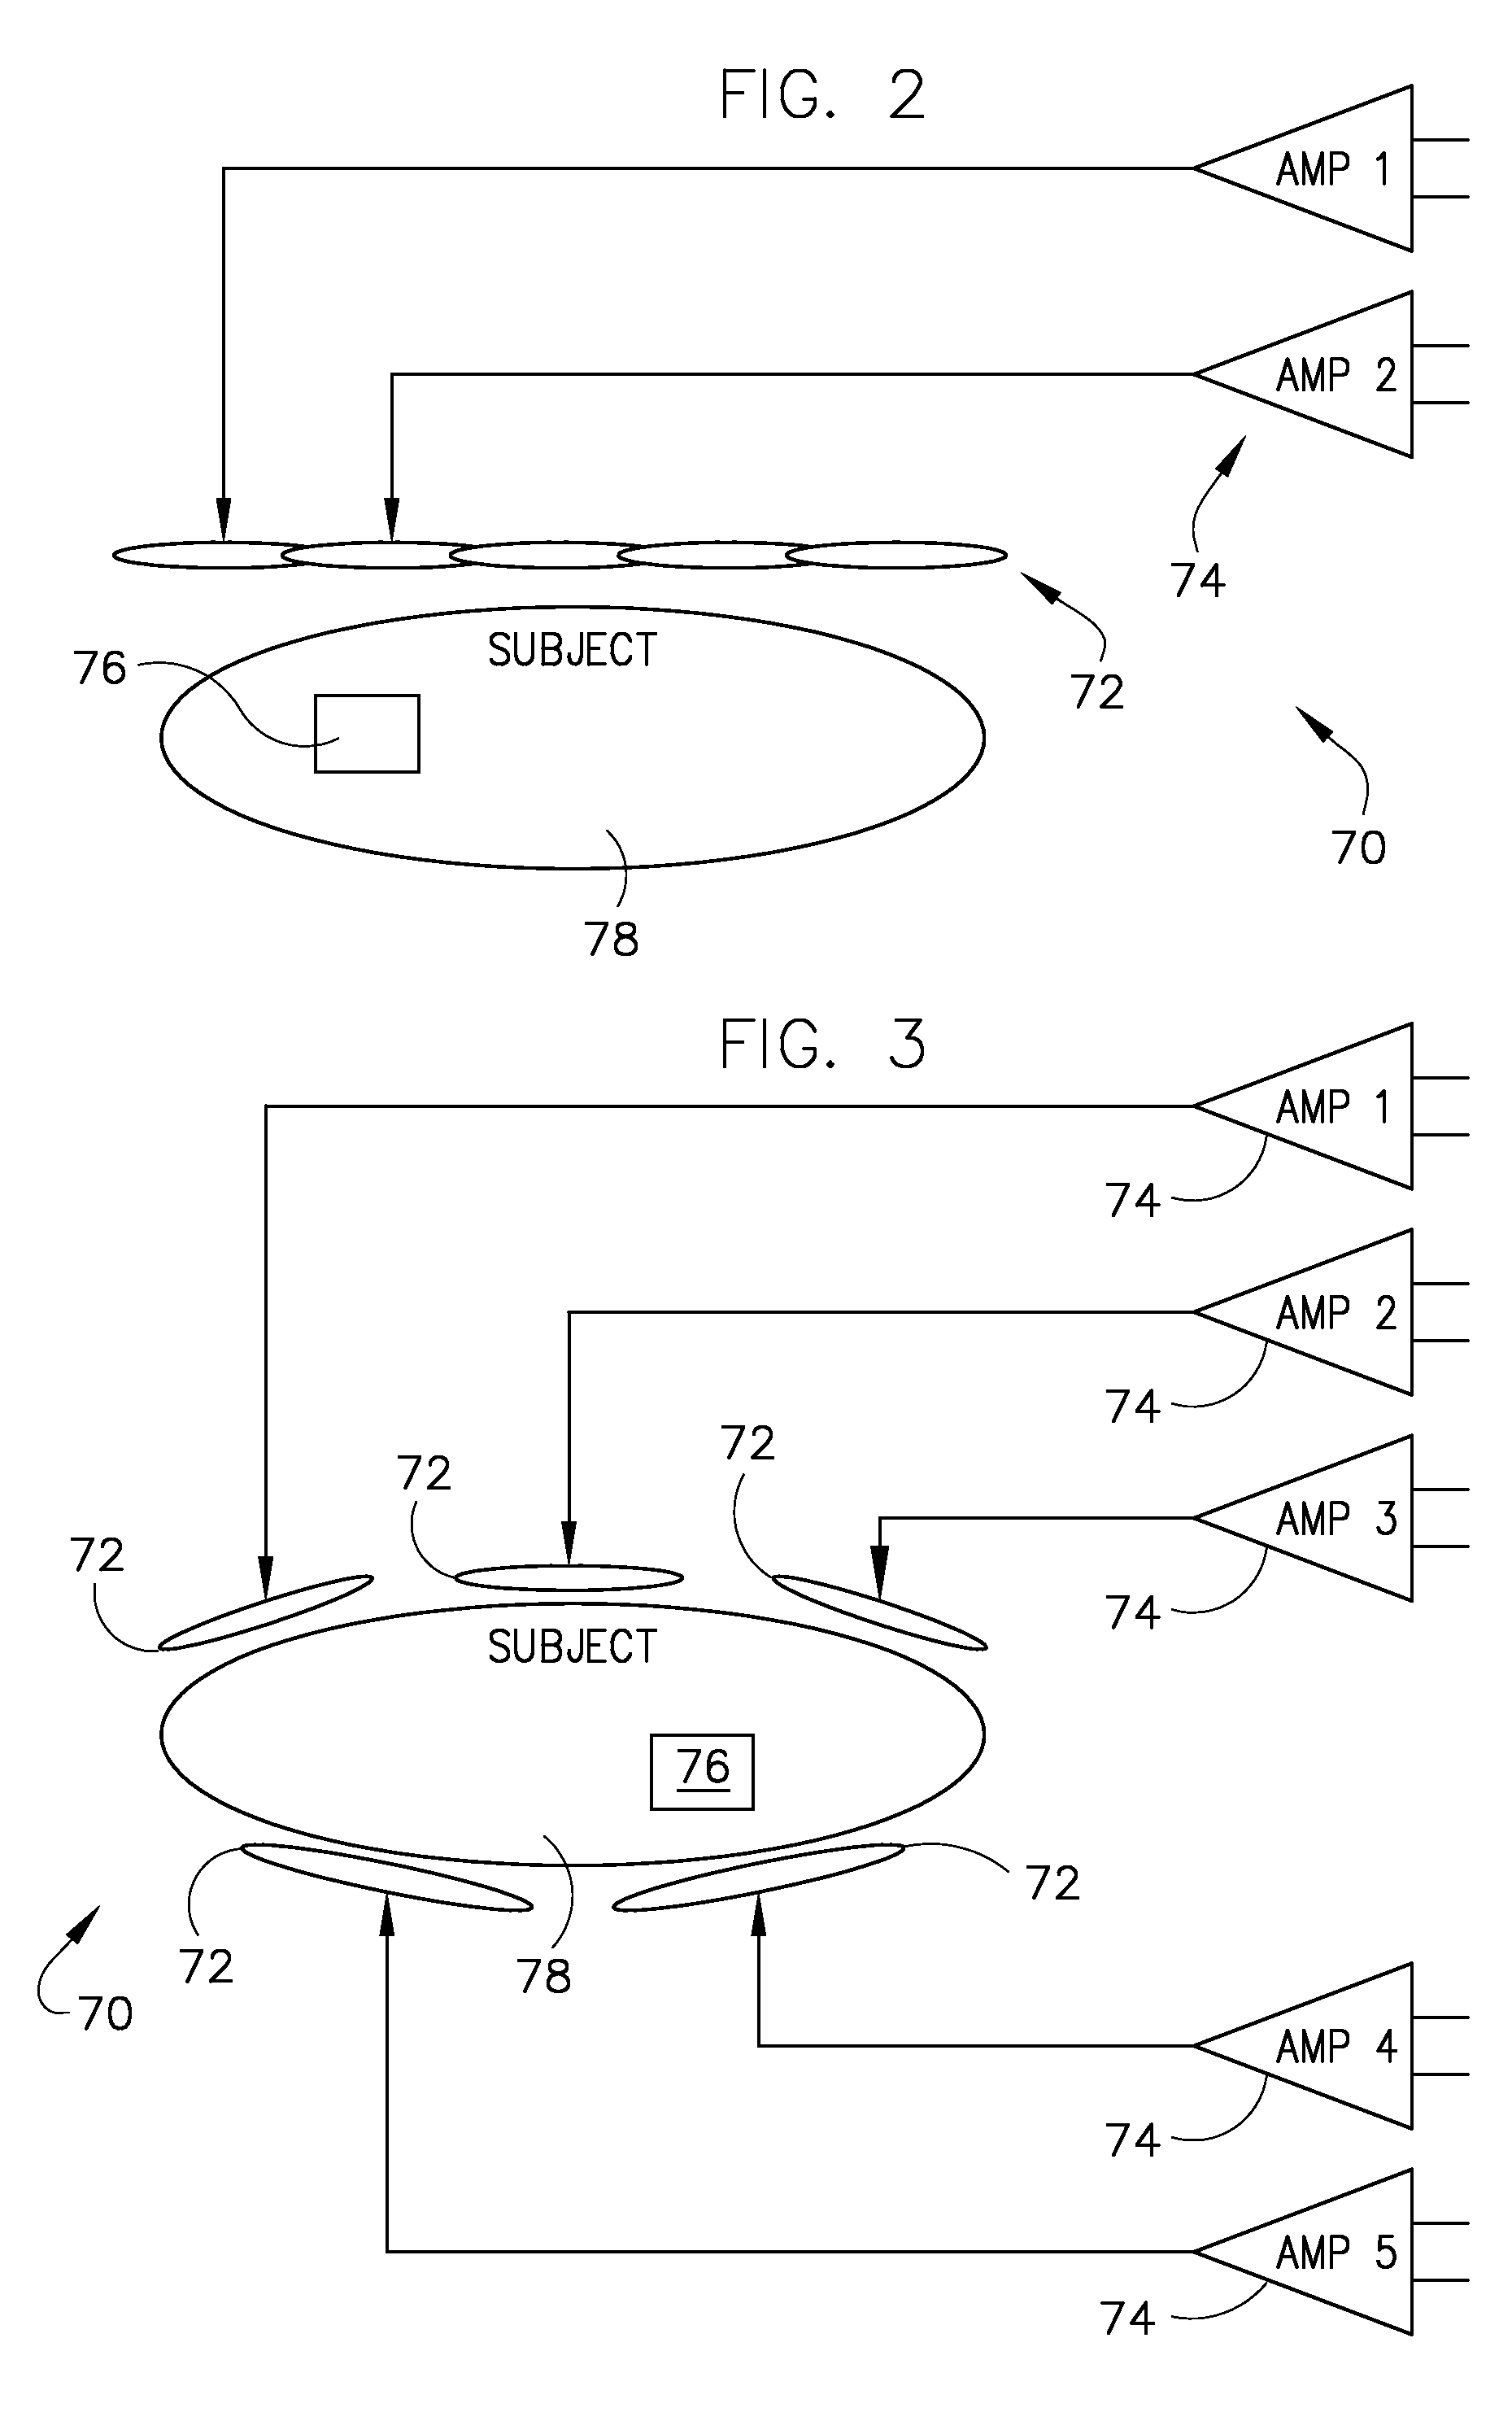 Apparatus and method for optimizing the spectra of parallel excitation pulses